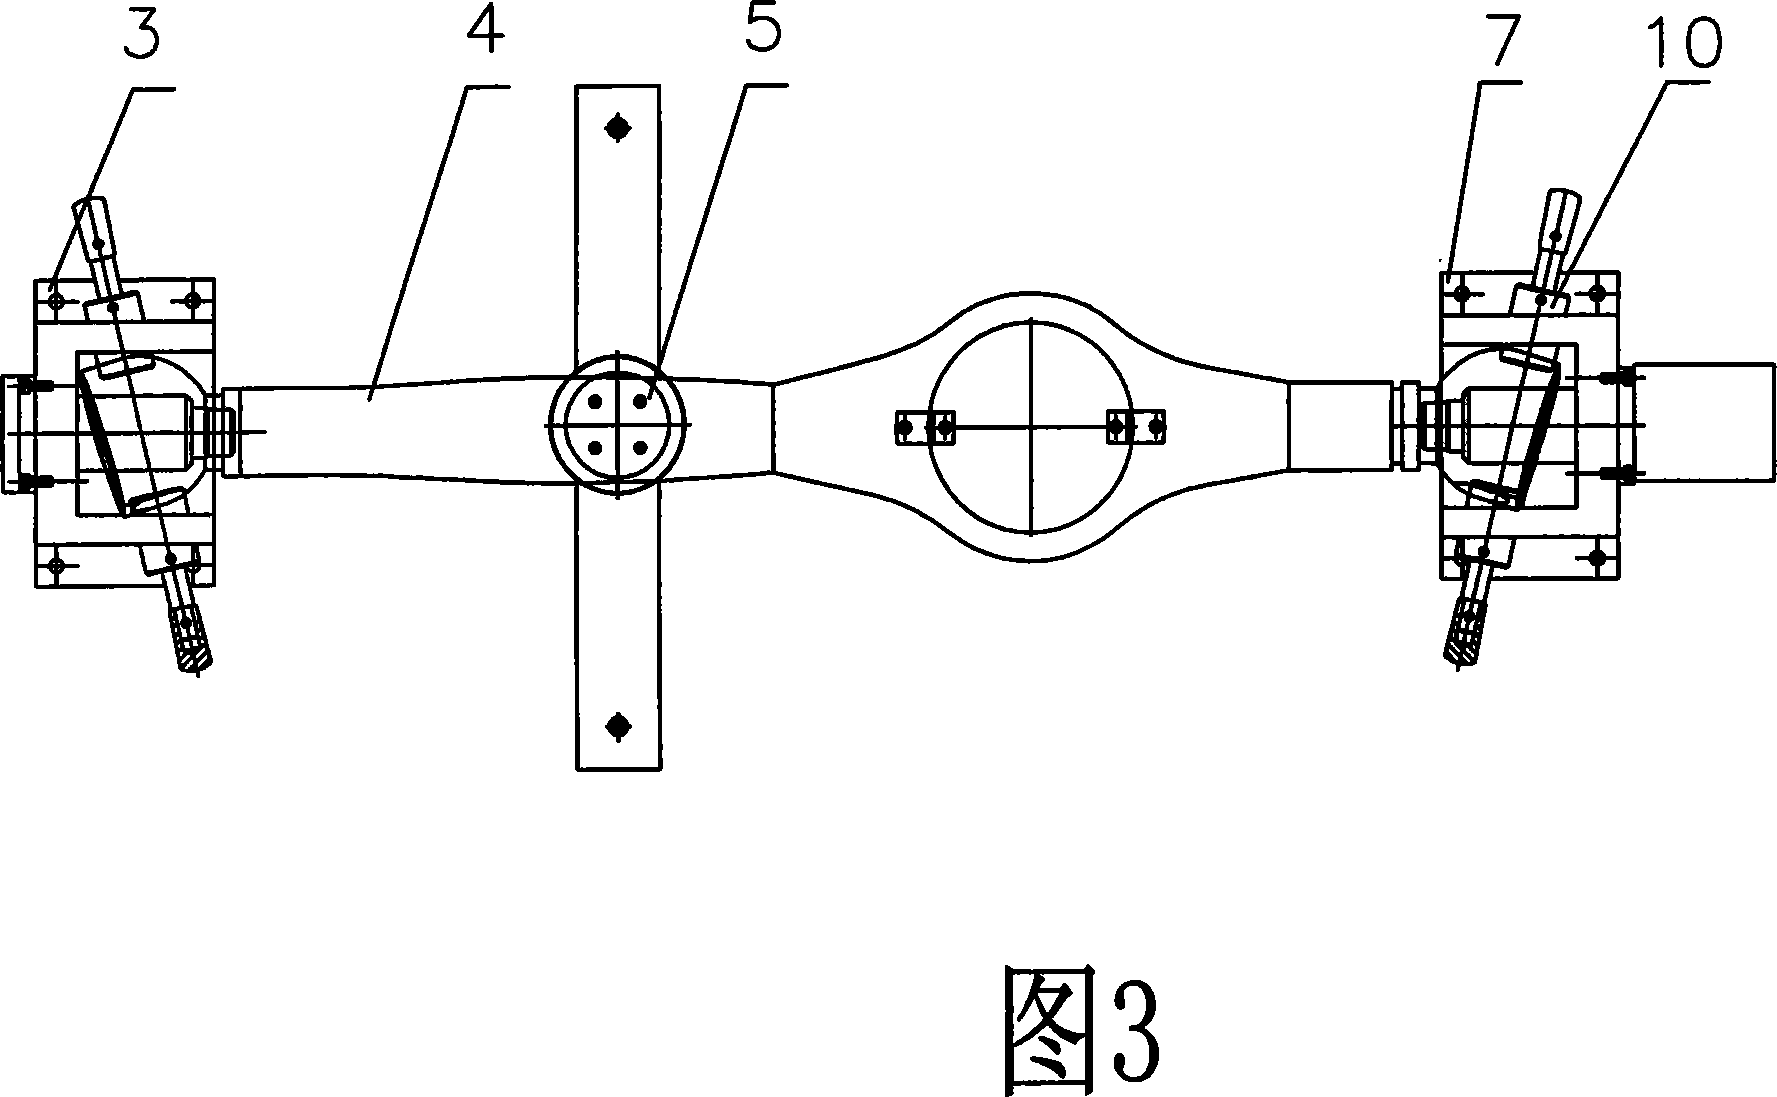 Welding clamp and welding process for axle housing assembly